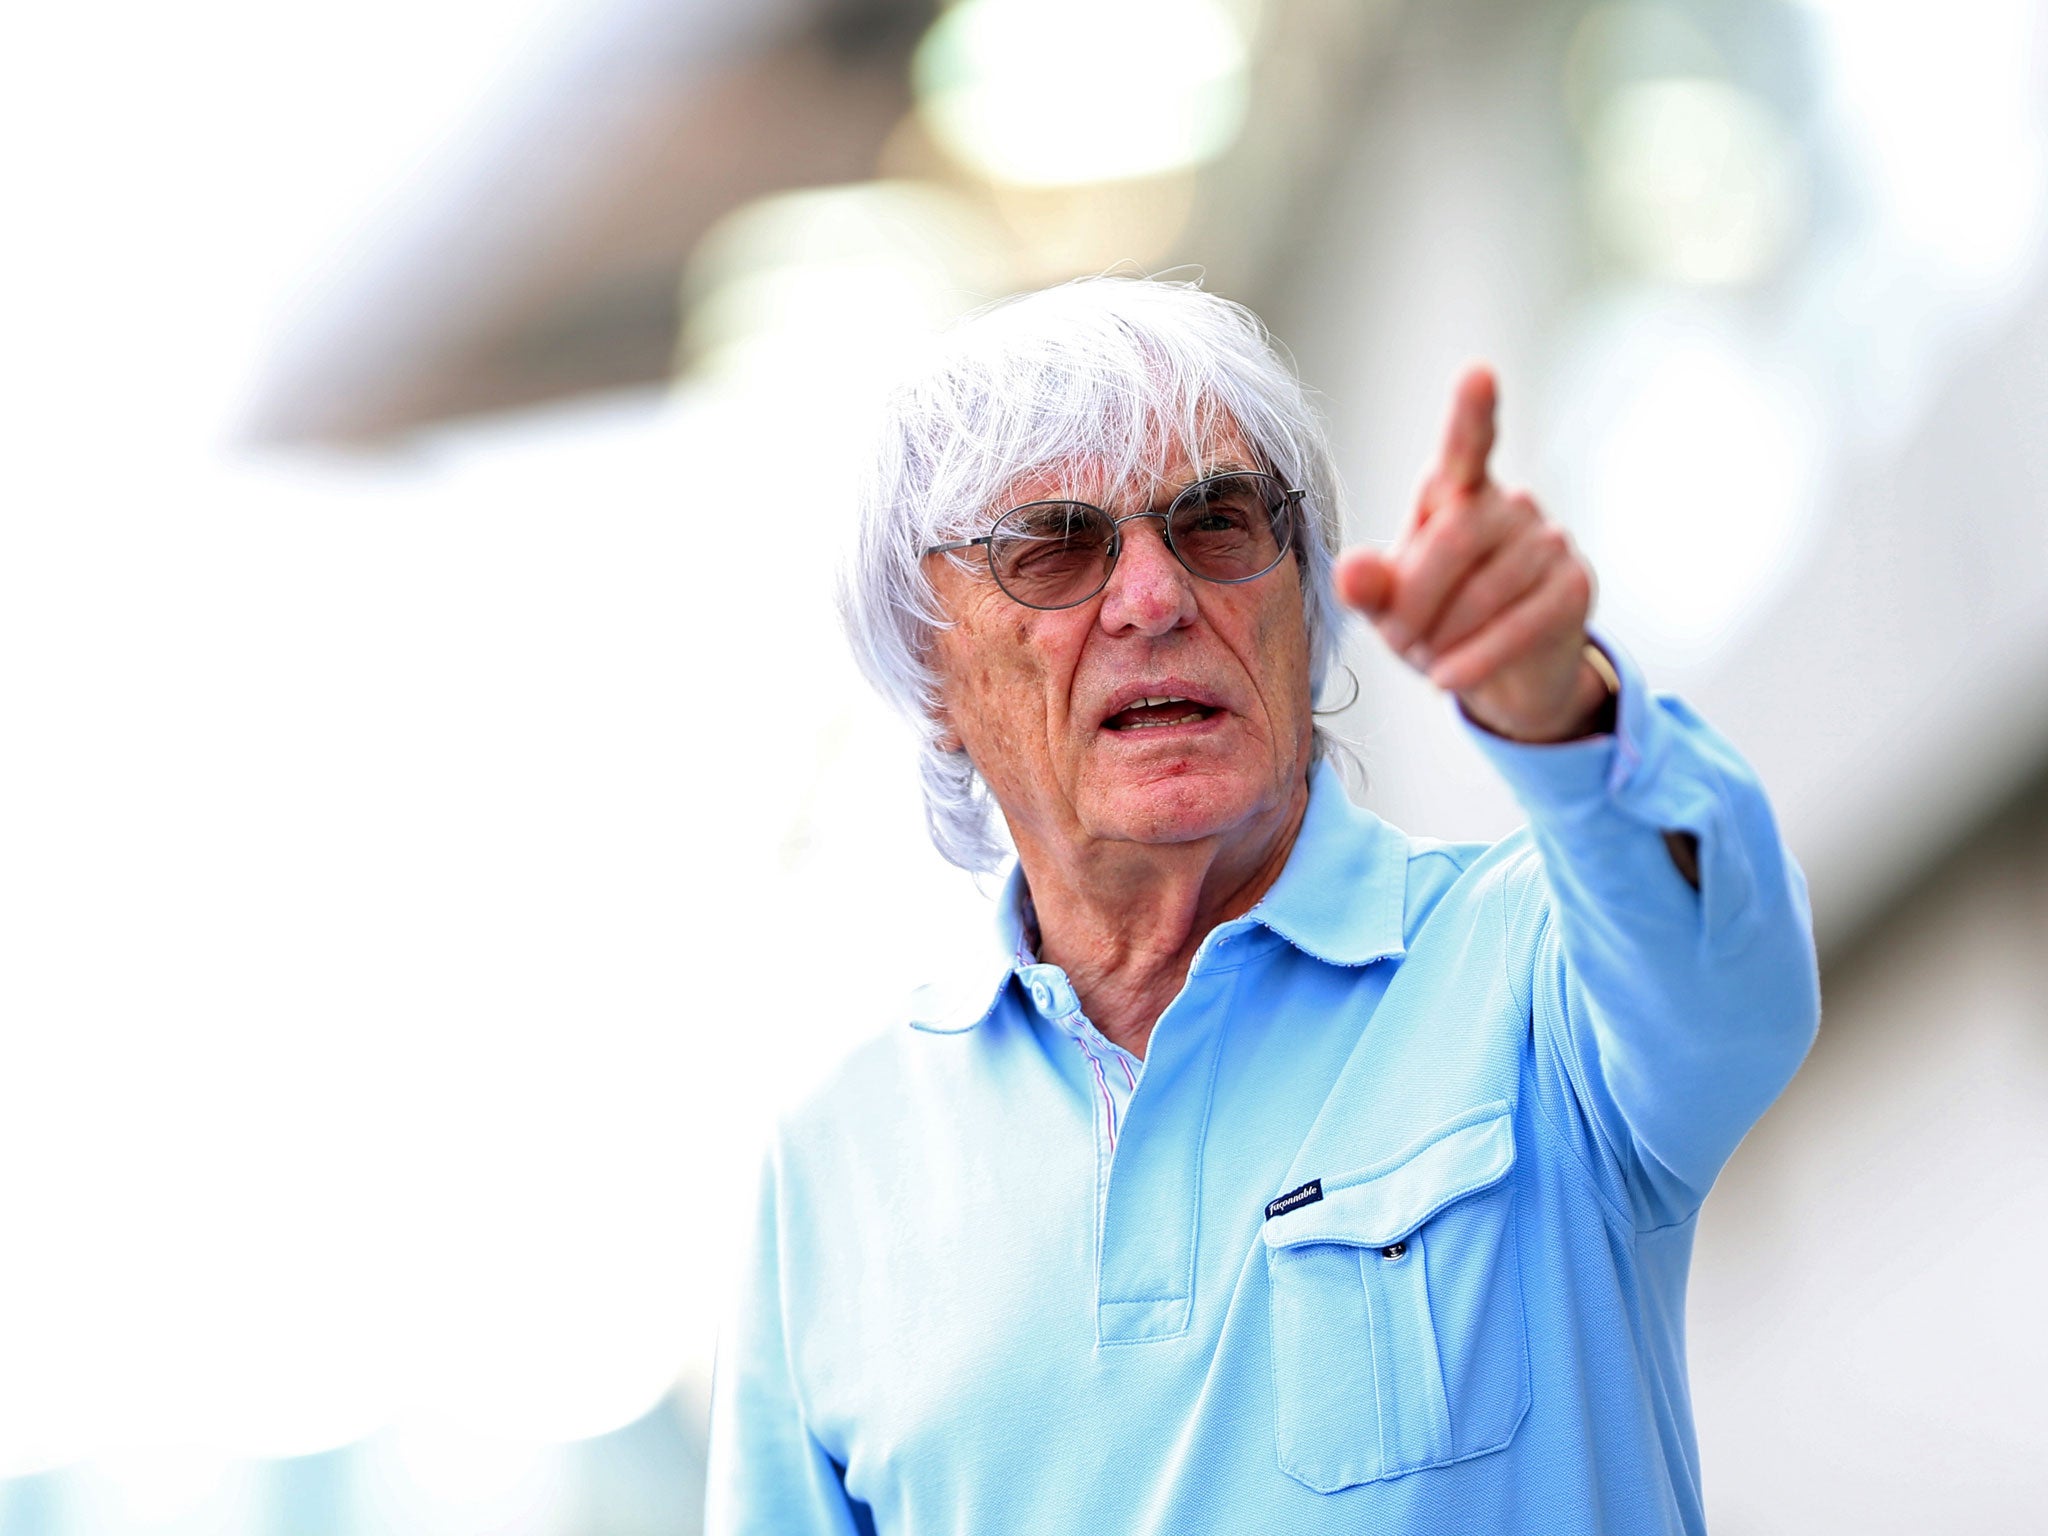 Ecclestone also said he doesn't want to attract the young generation